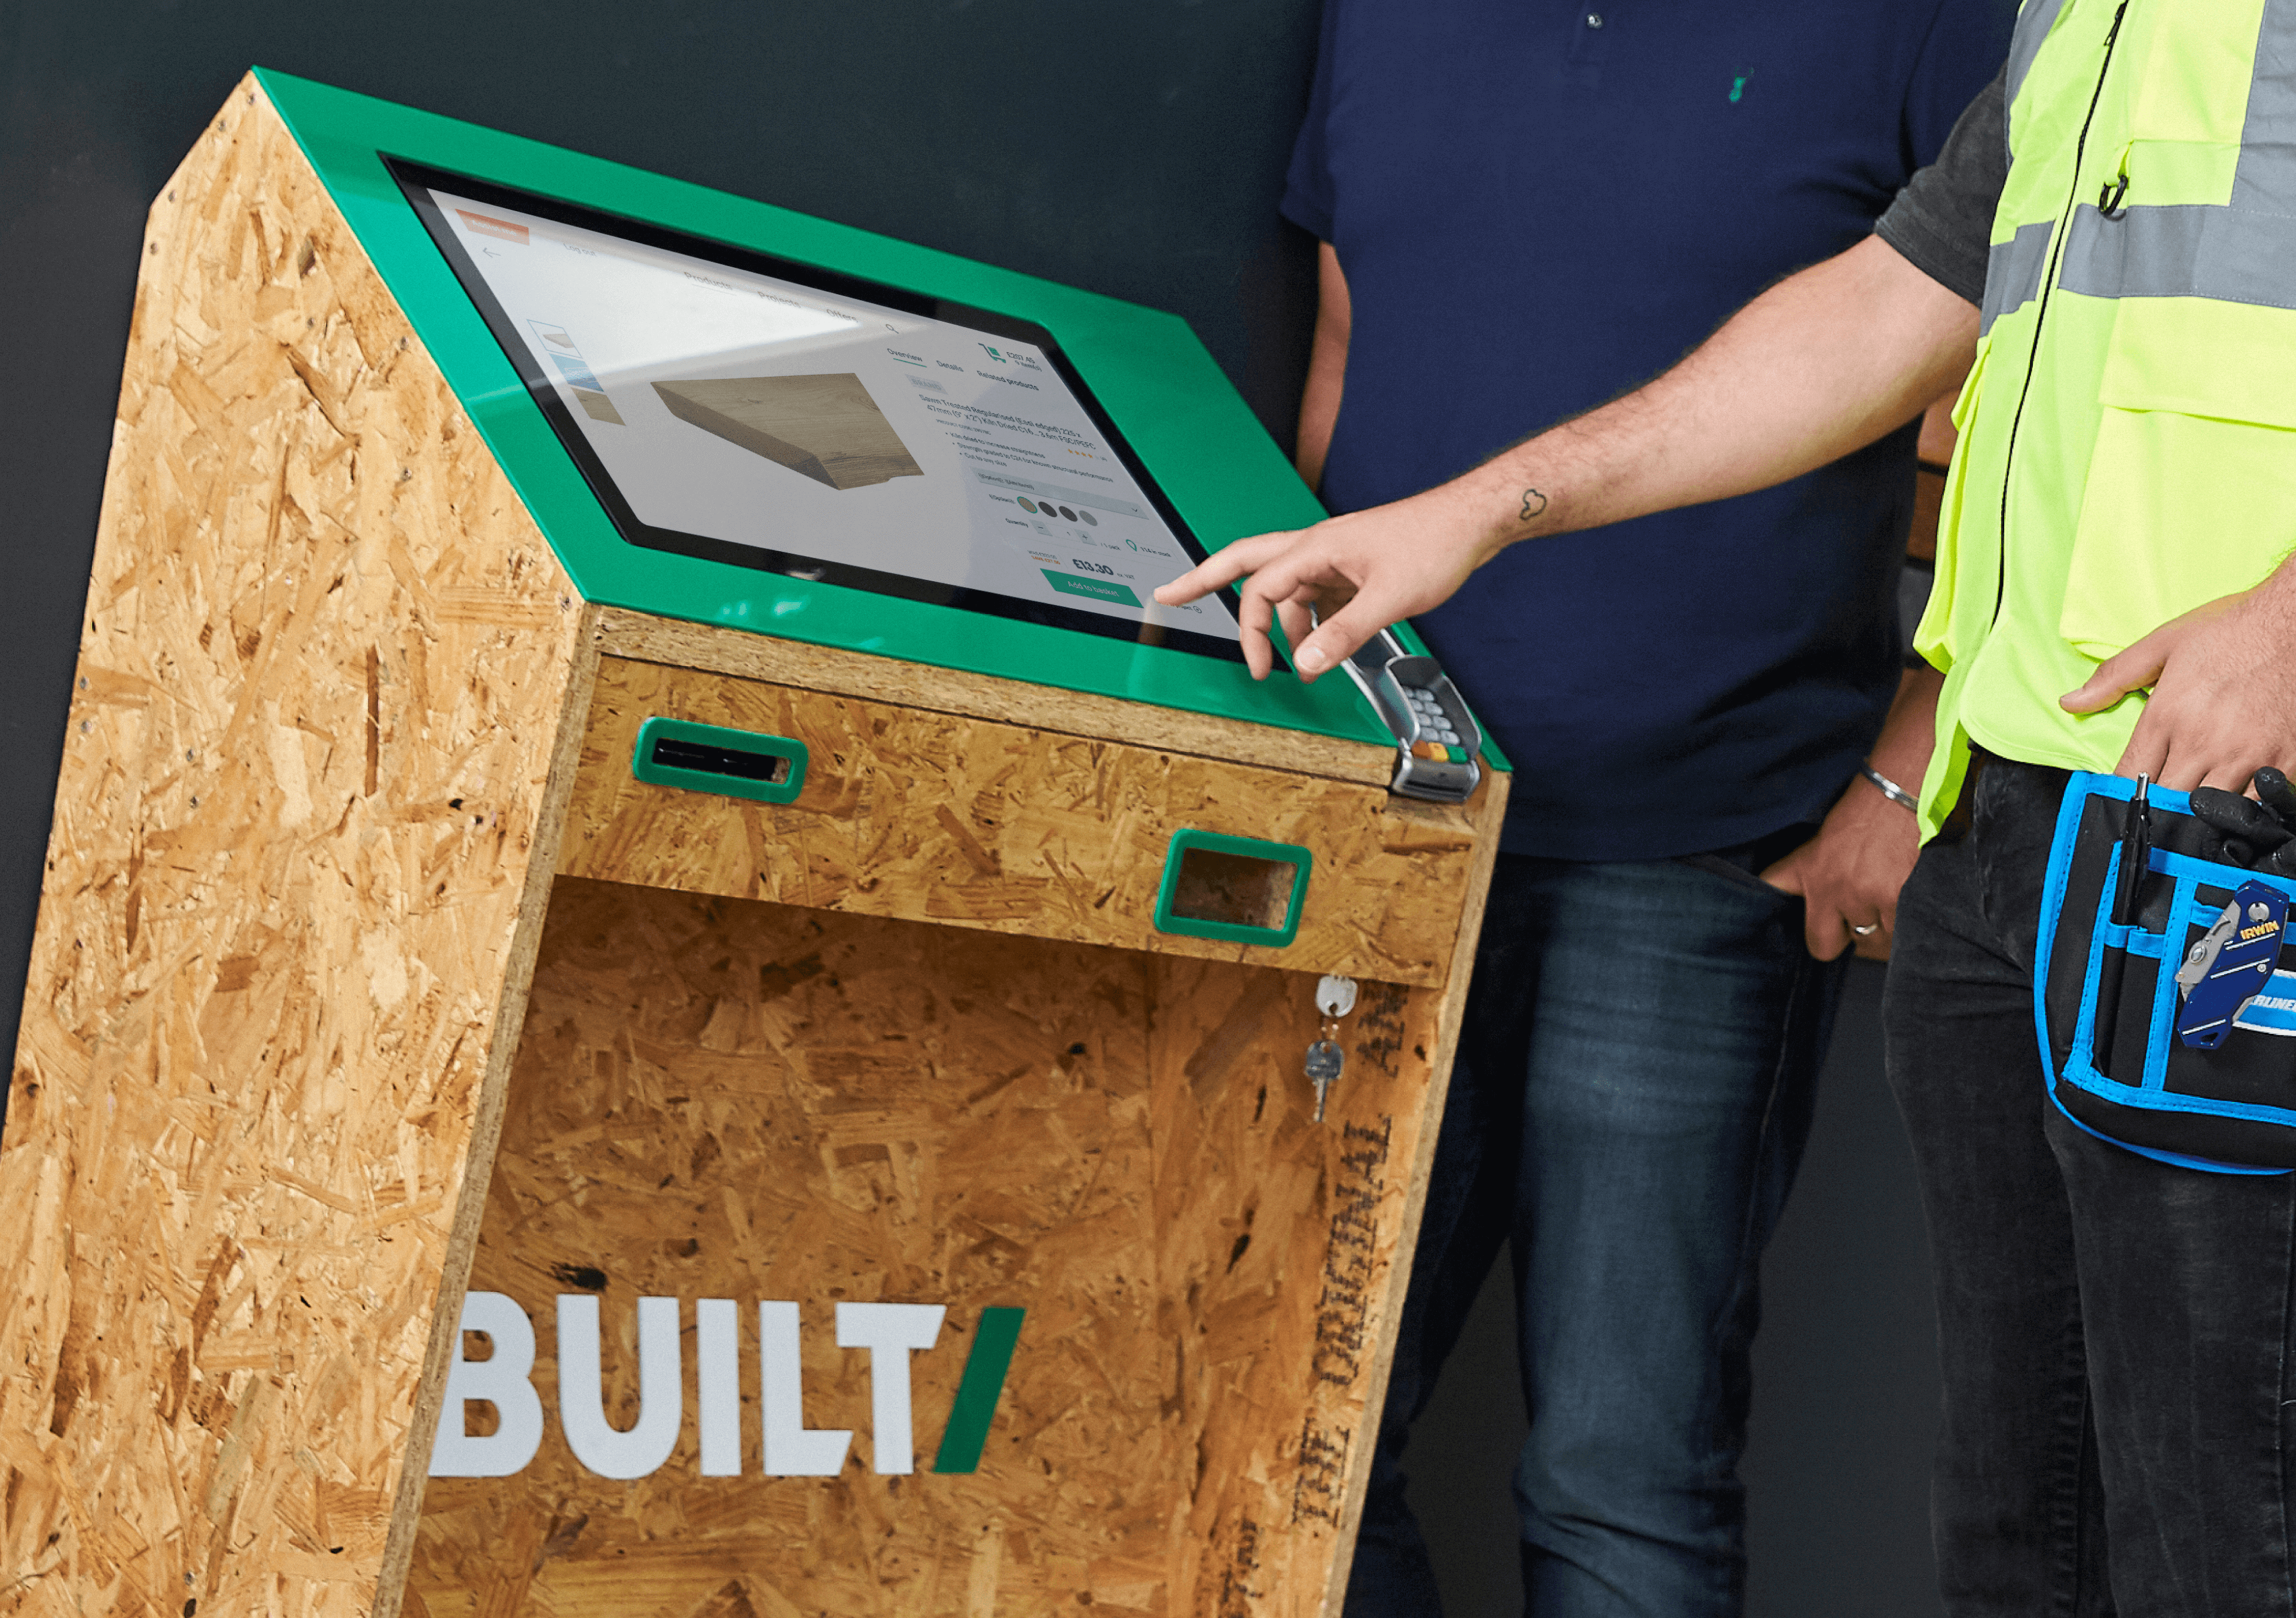 Built builders merchant branded self-service counter being used by two men to purchase a product